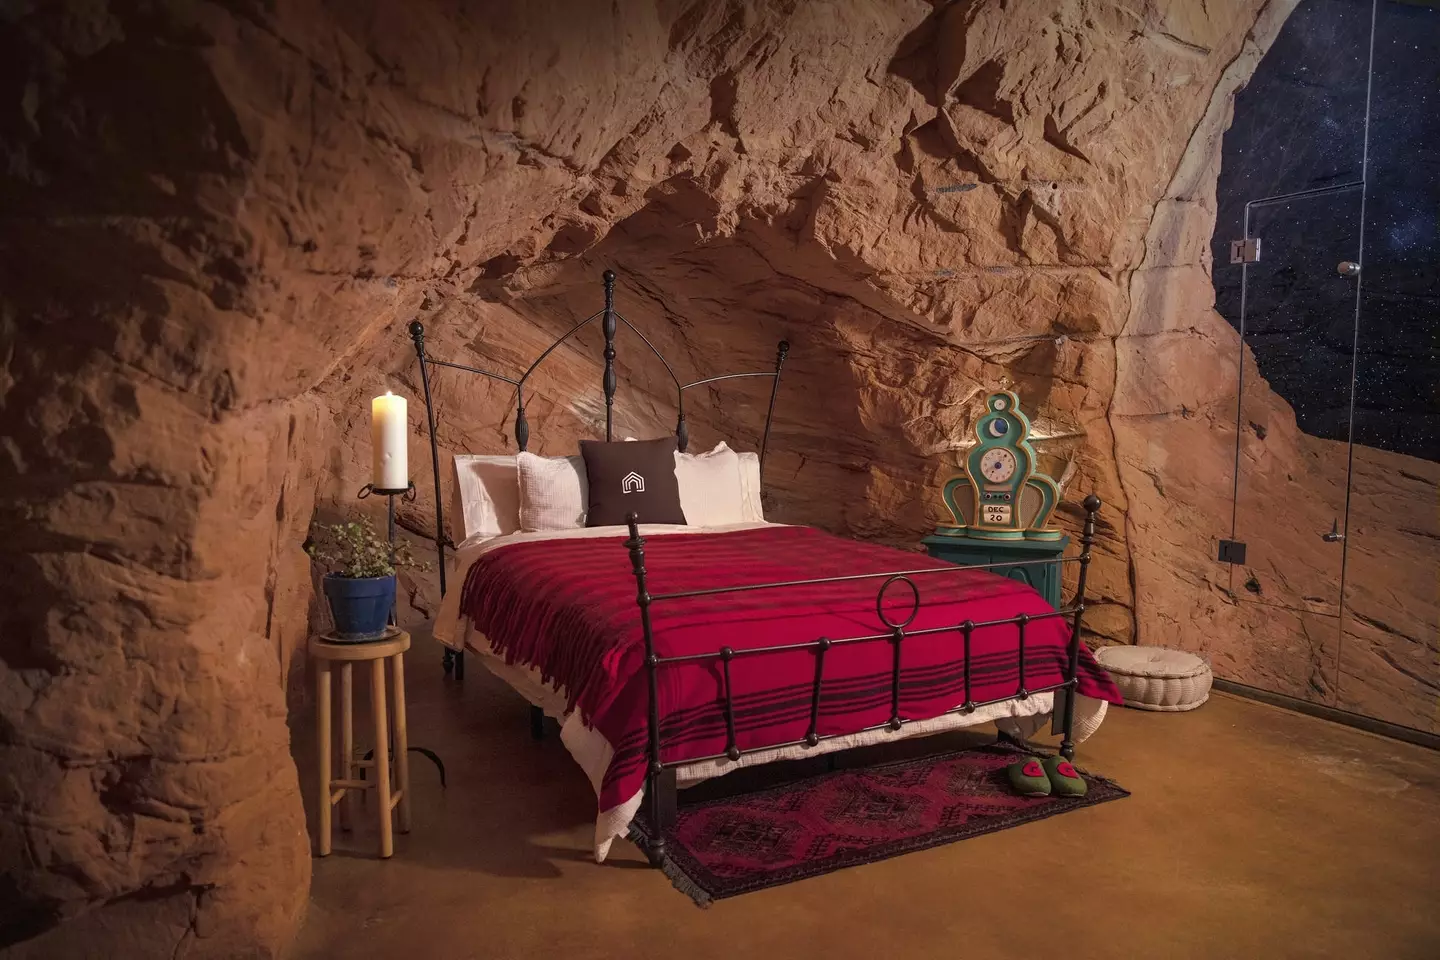 The cave is two bedrooms (